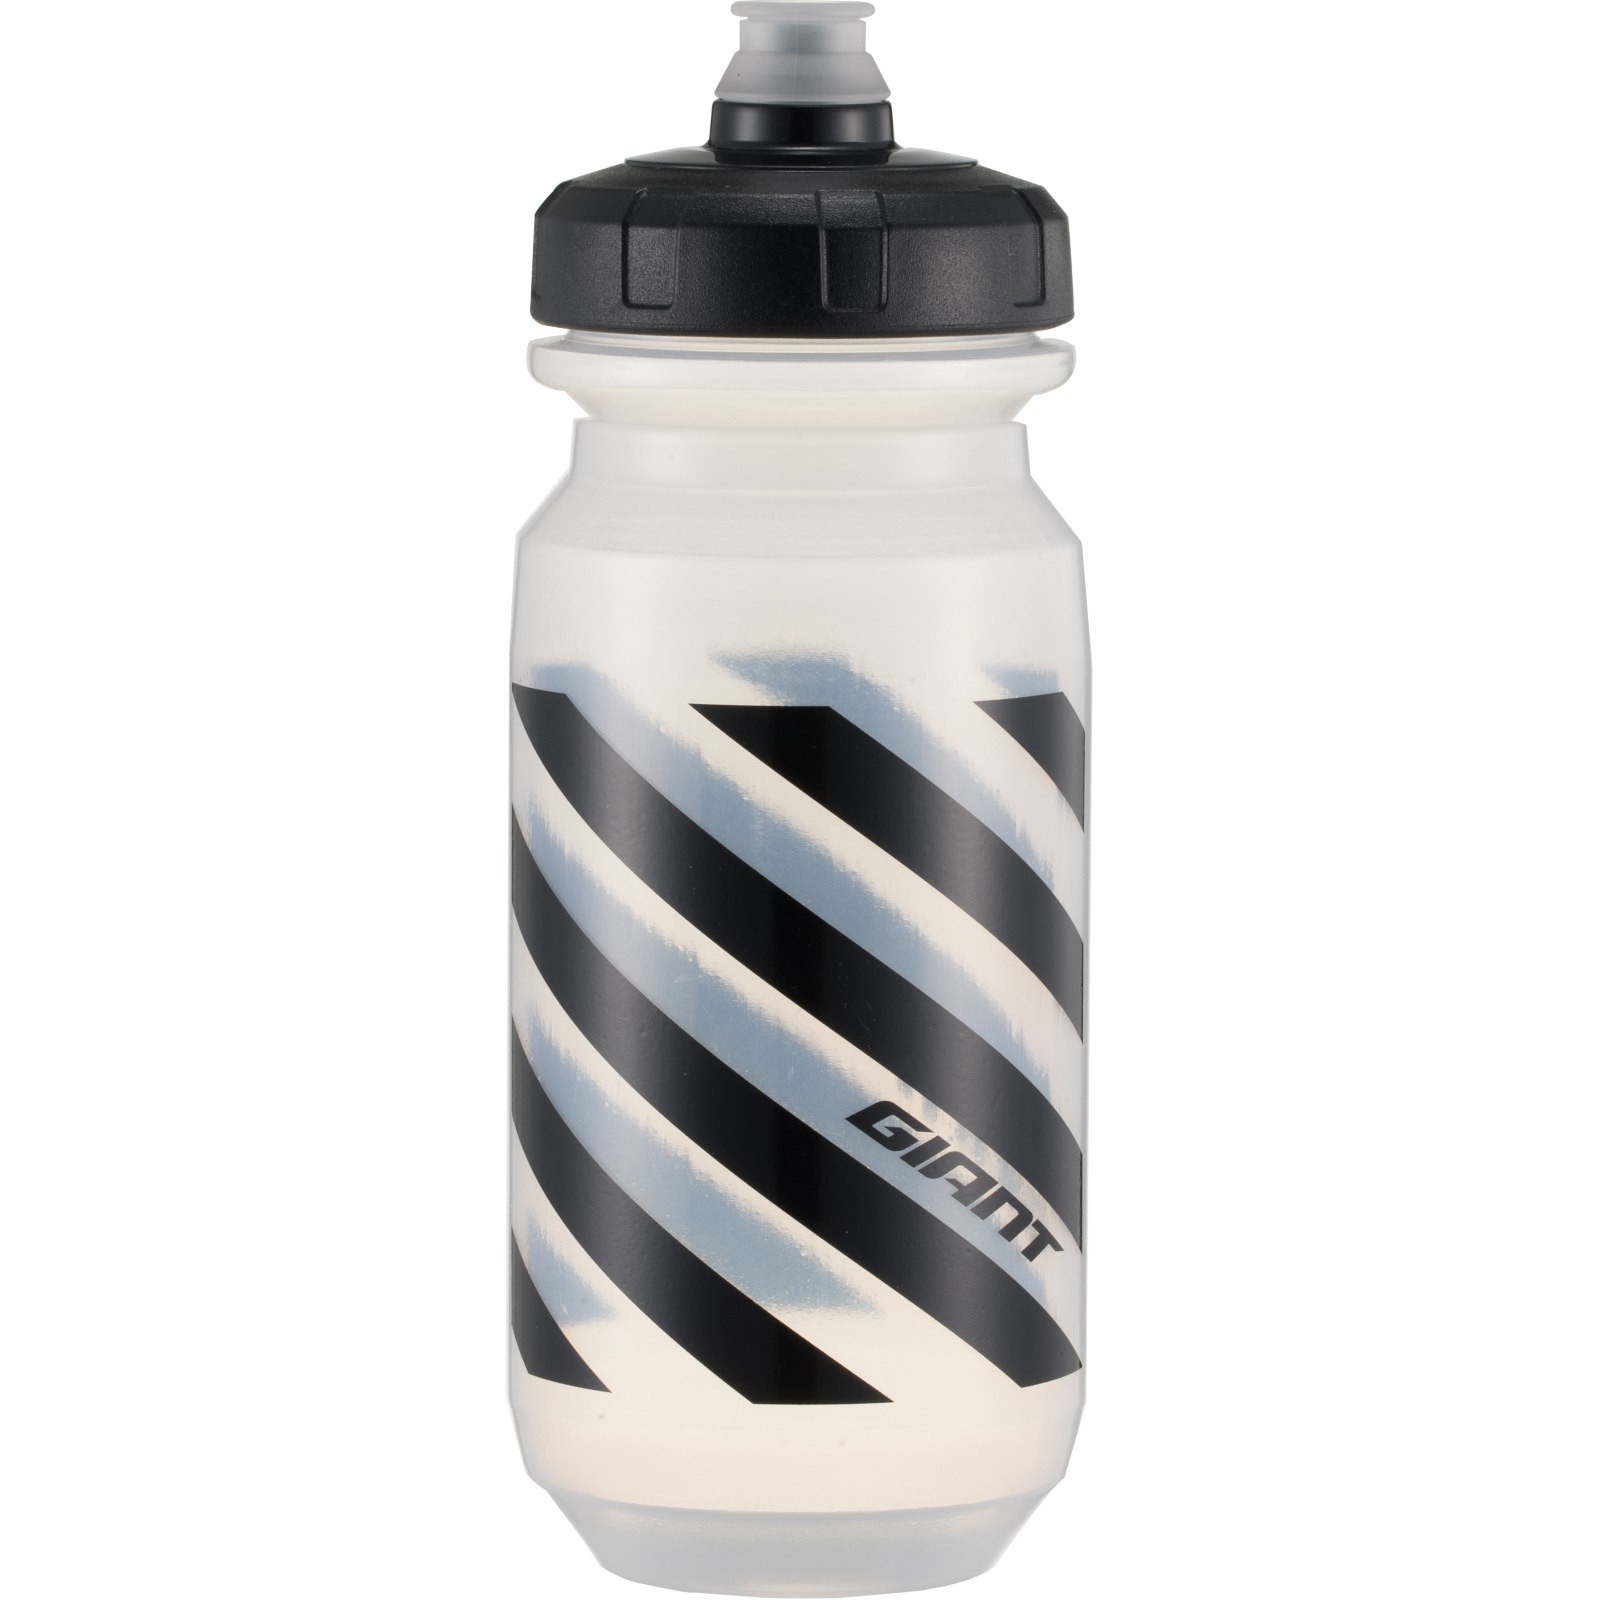 Picture of Giant Doublespring Bottle 600ml - transparent black